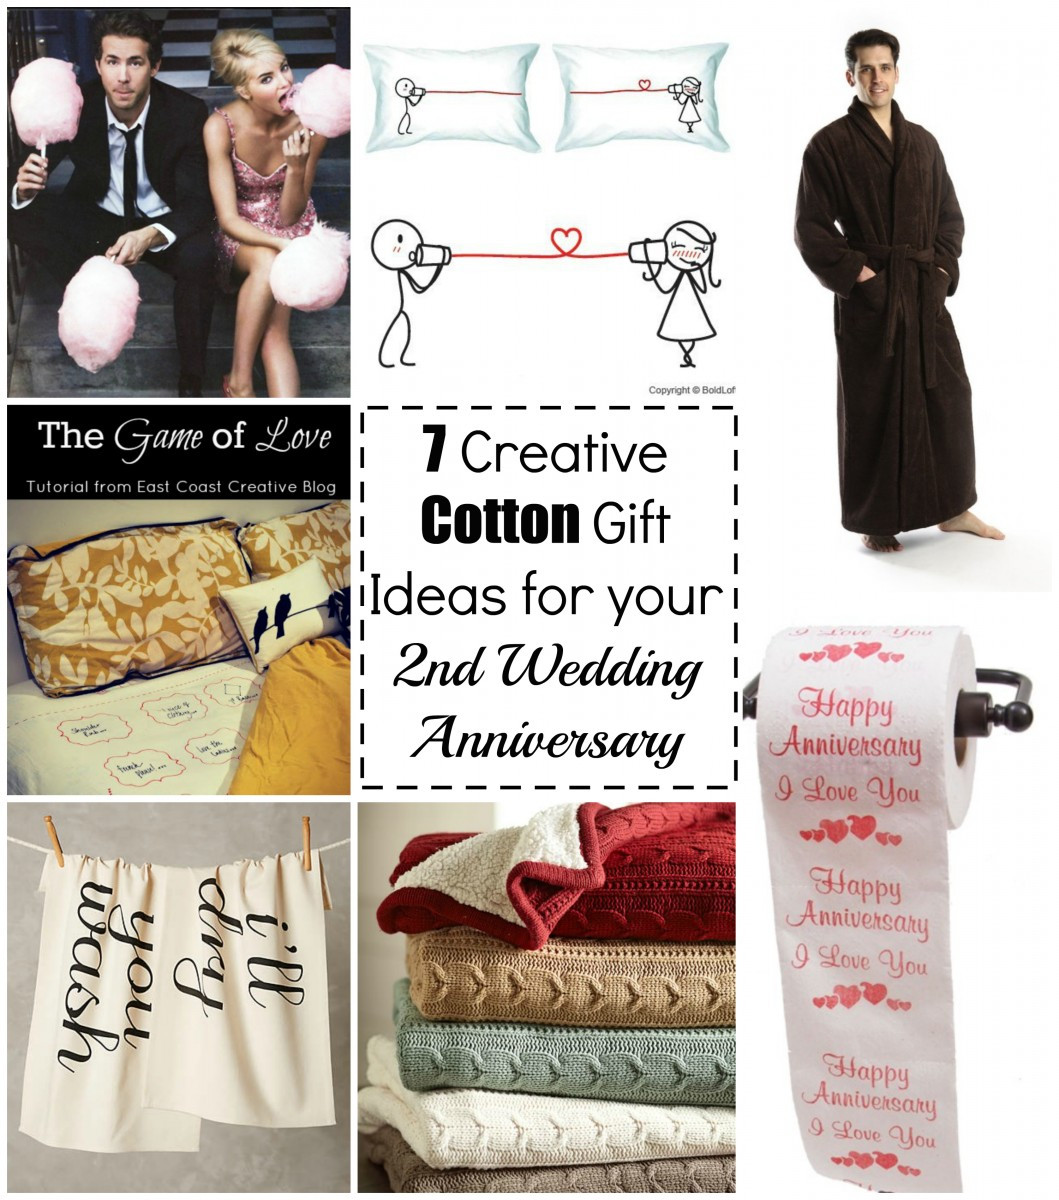 2Nd Wedding Gift Ideas
 7 Cotton Gift Ideas for your 2nd Wedding Anniversary